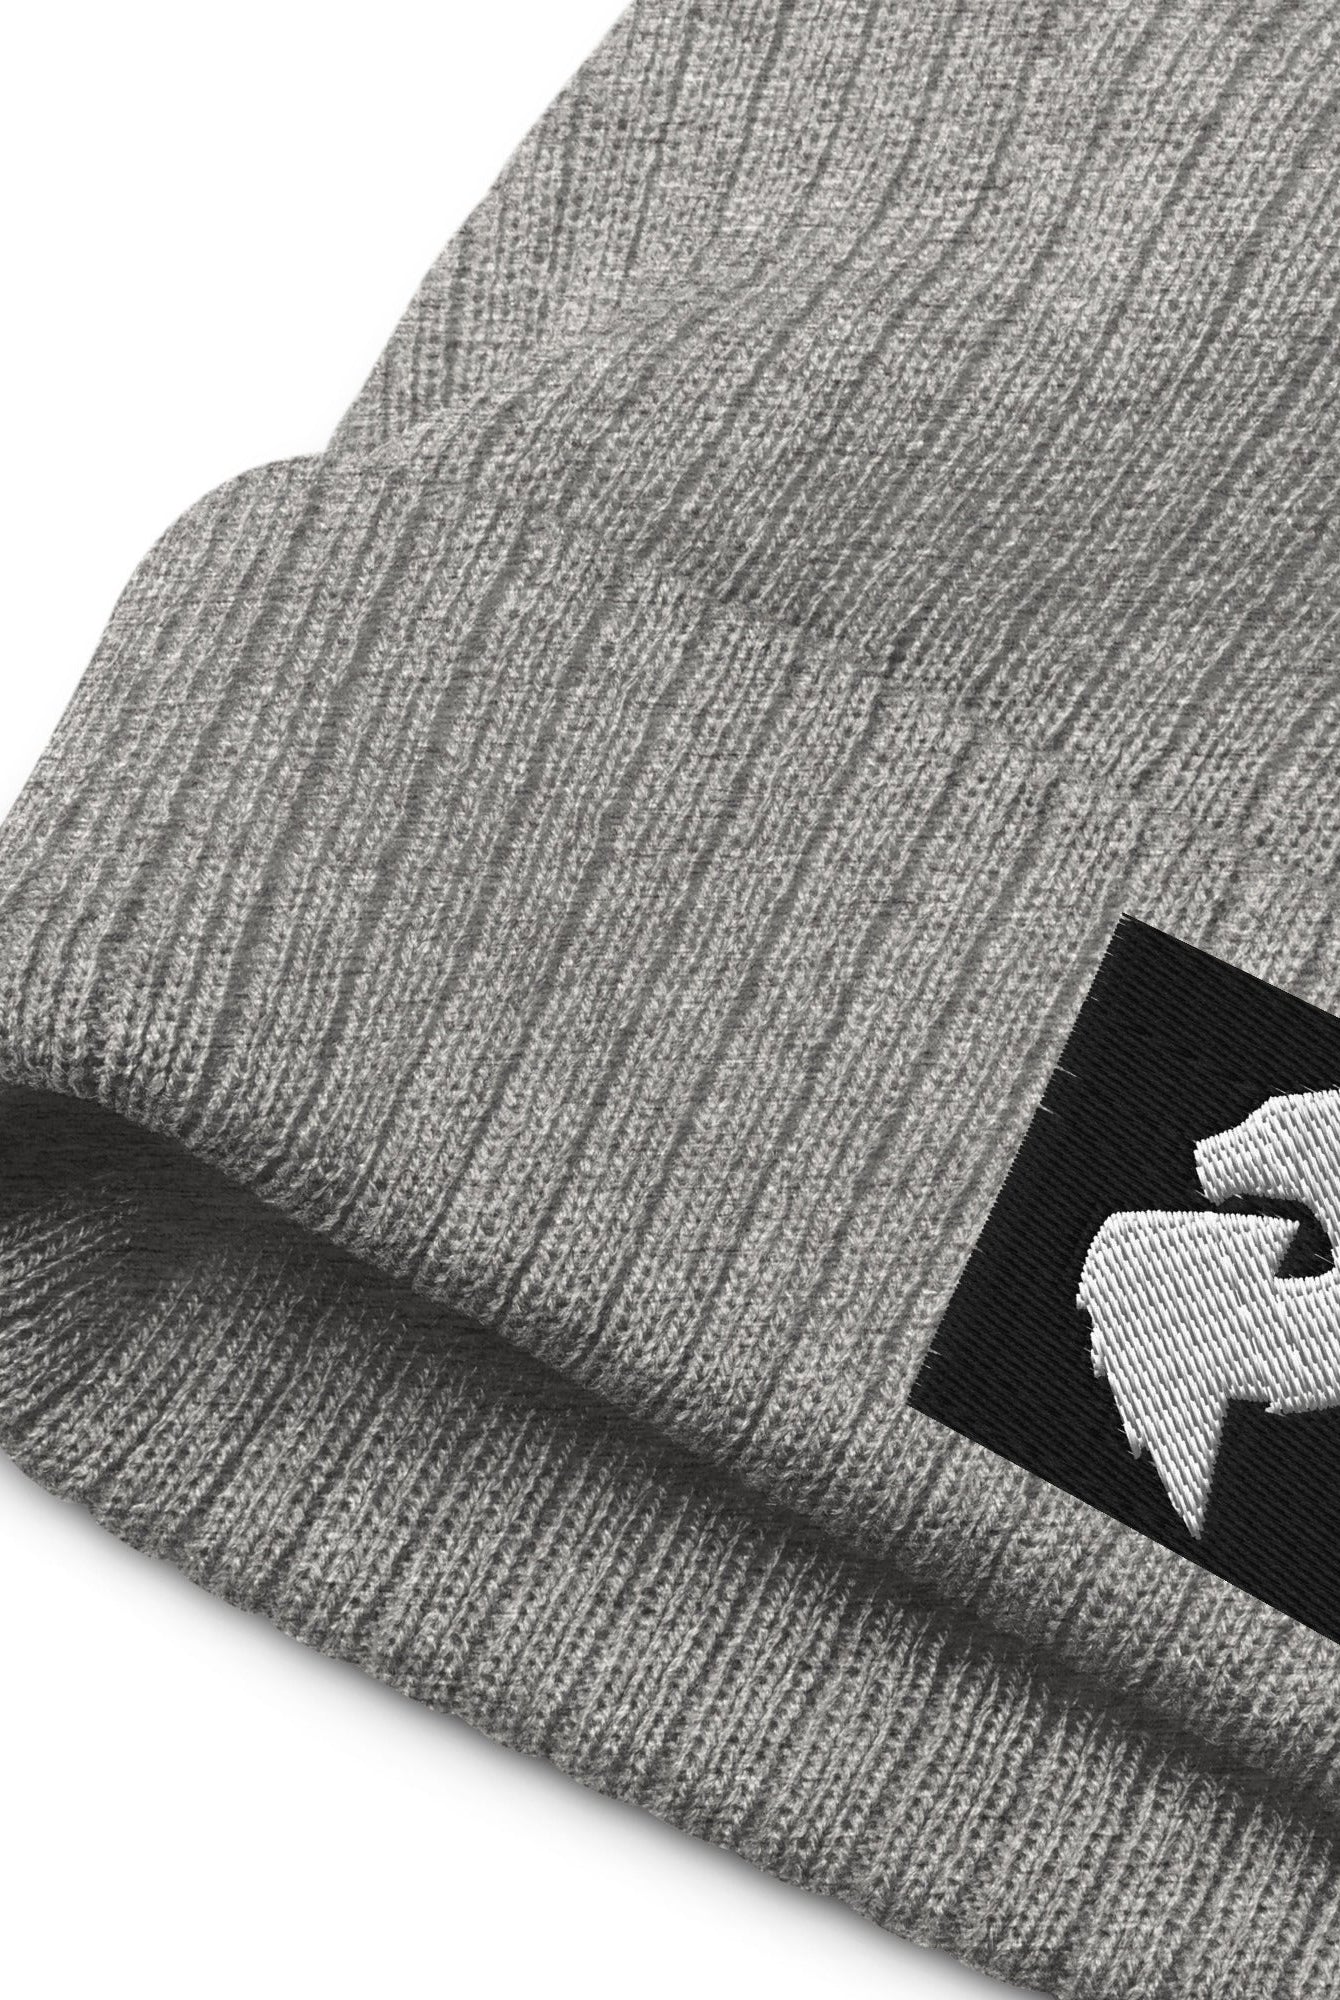 His or Hers Dragon Foxx™ Eco - Ribbed knit beanie - His or Hers Dragon Foxx™ Eco - Ribbed knit beanie - DRAGON FOXX™ - His or Hers Dragon Foxx™ Eco - Ribbed knit beanie - 2867494_13239 - Light Grey Melange - - Accessories - Acid Green Eco - Ribbed knit beanie - Beanie